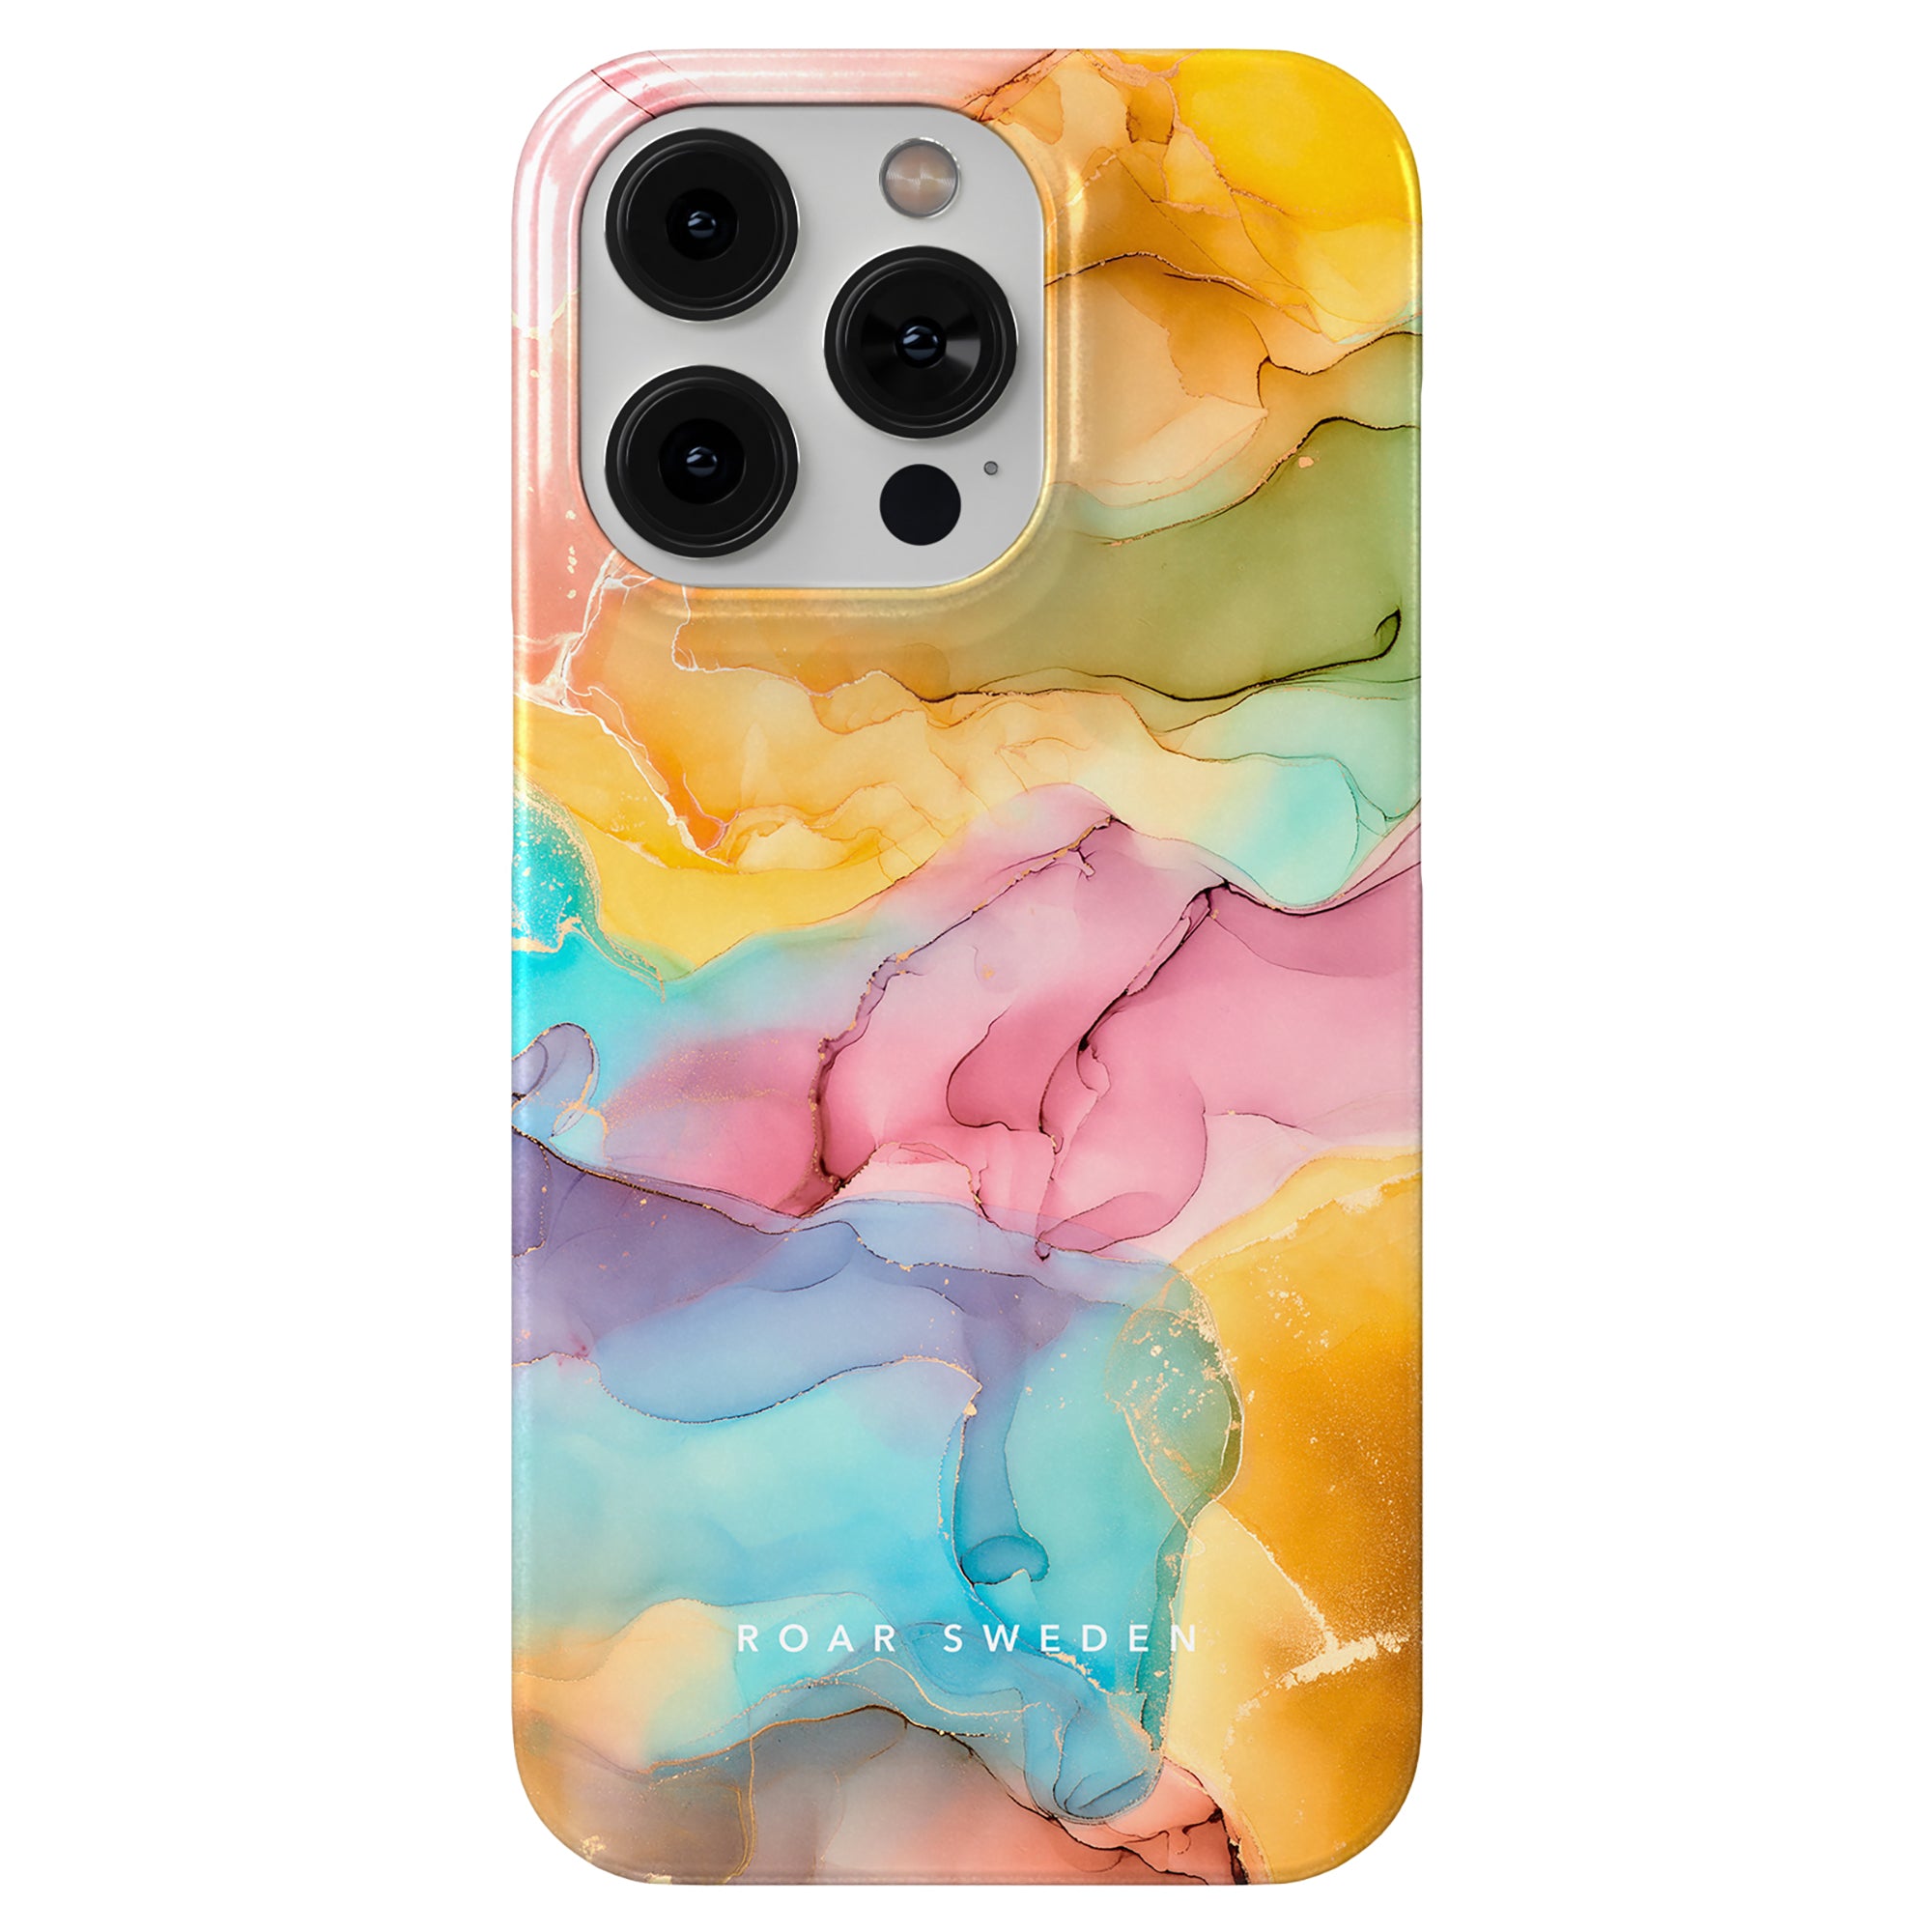 A slim and colorful Summer Breeze - Slim case that skyddar mobil for the iPhone 11.